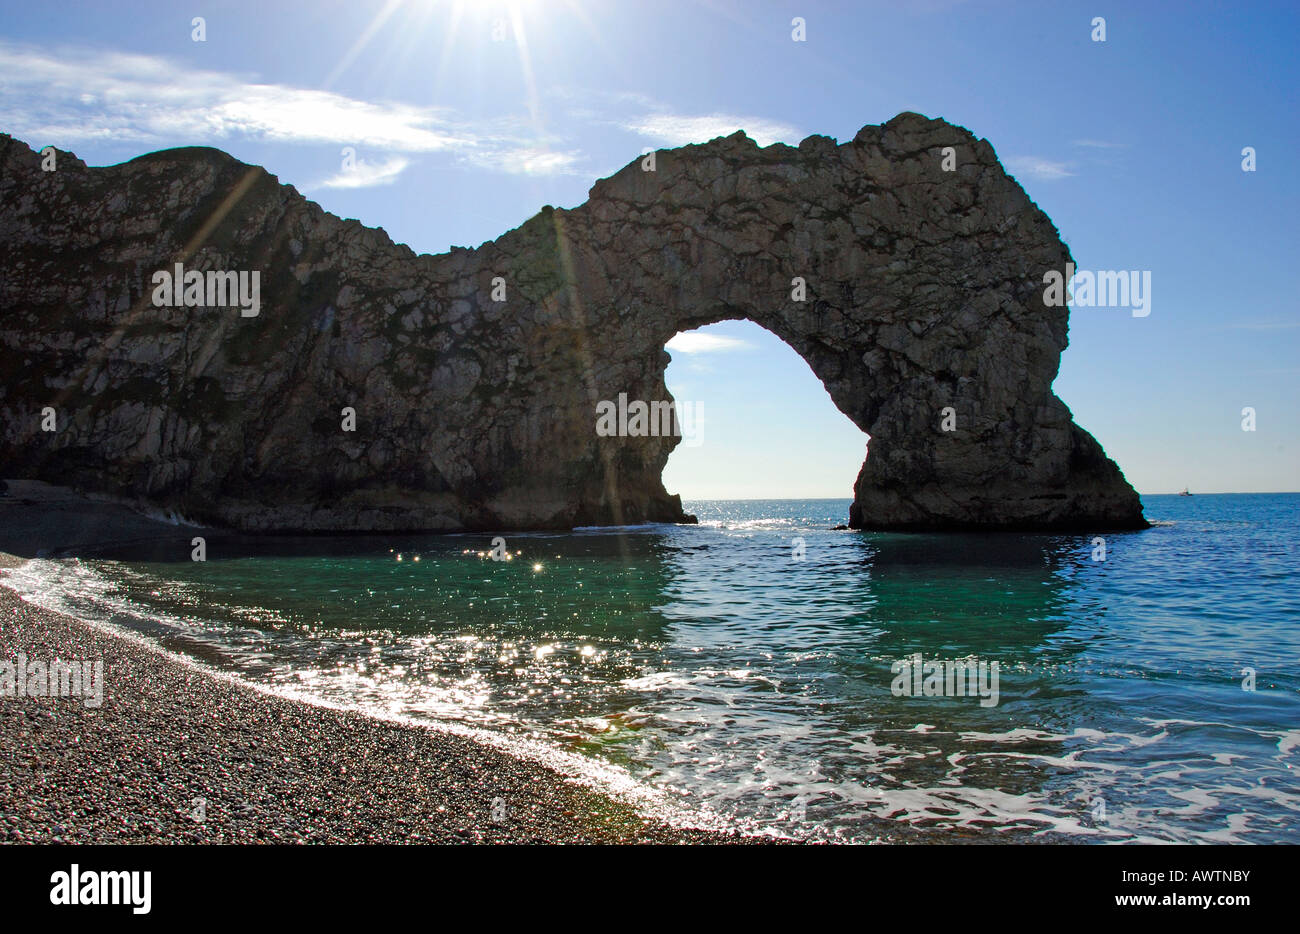 durdle door is a timeless geological wonder Stock Photo